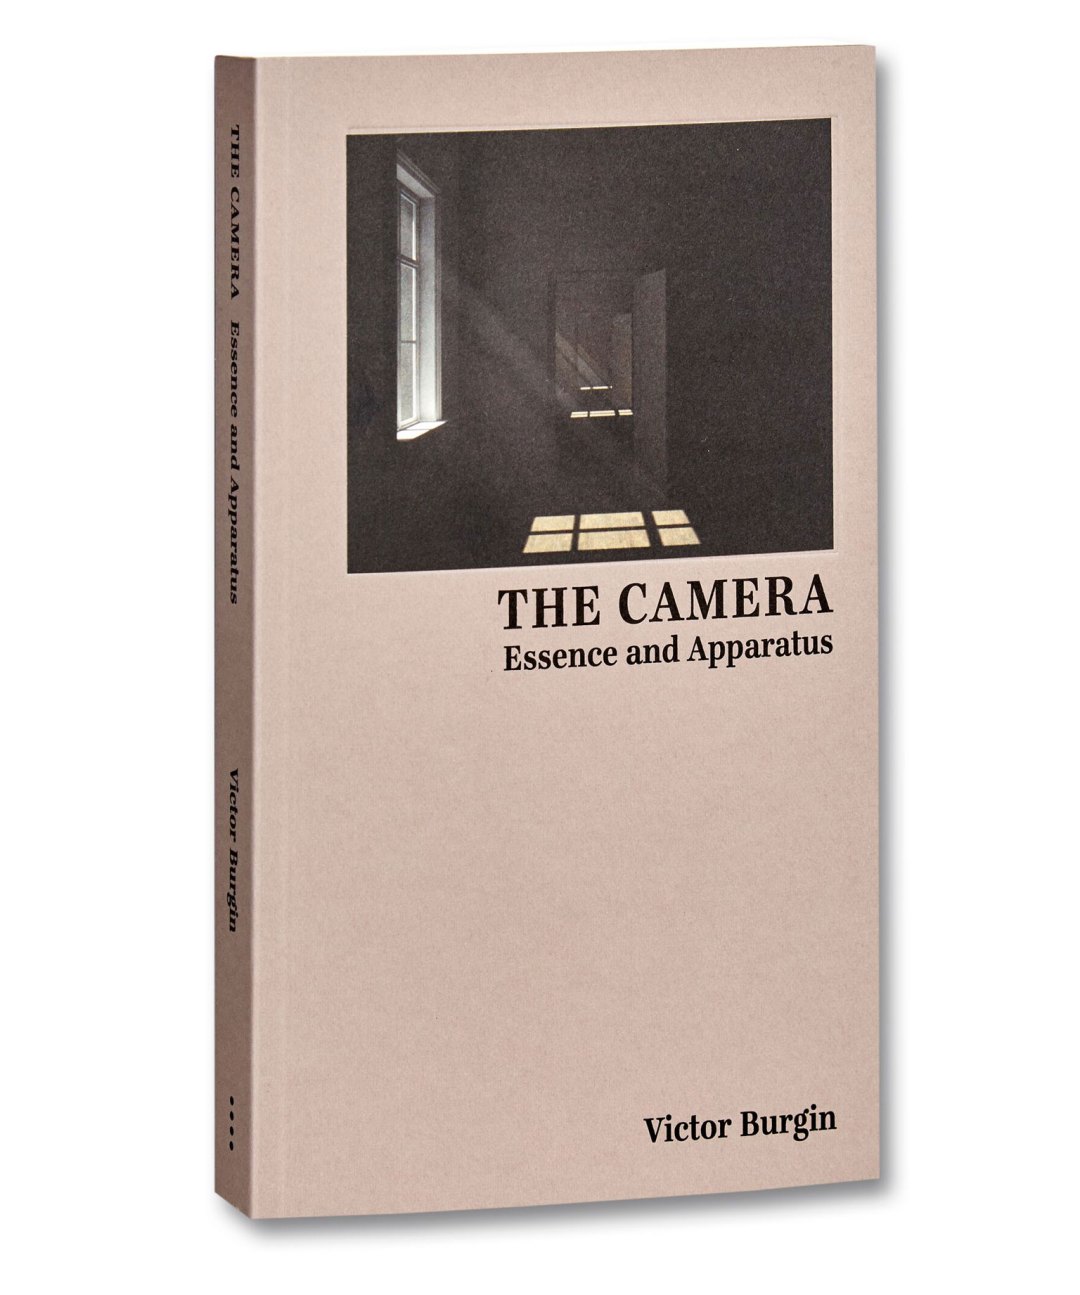 Victor Burgin; The Camera: Essence and Apparatus